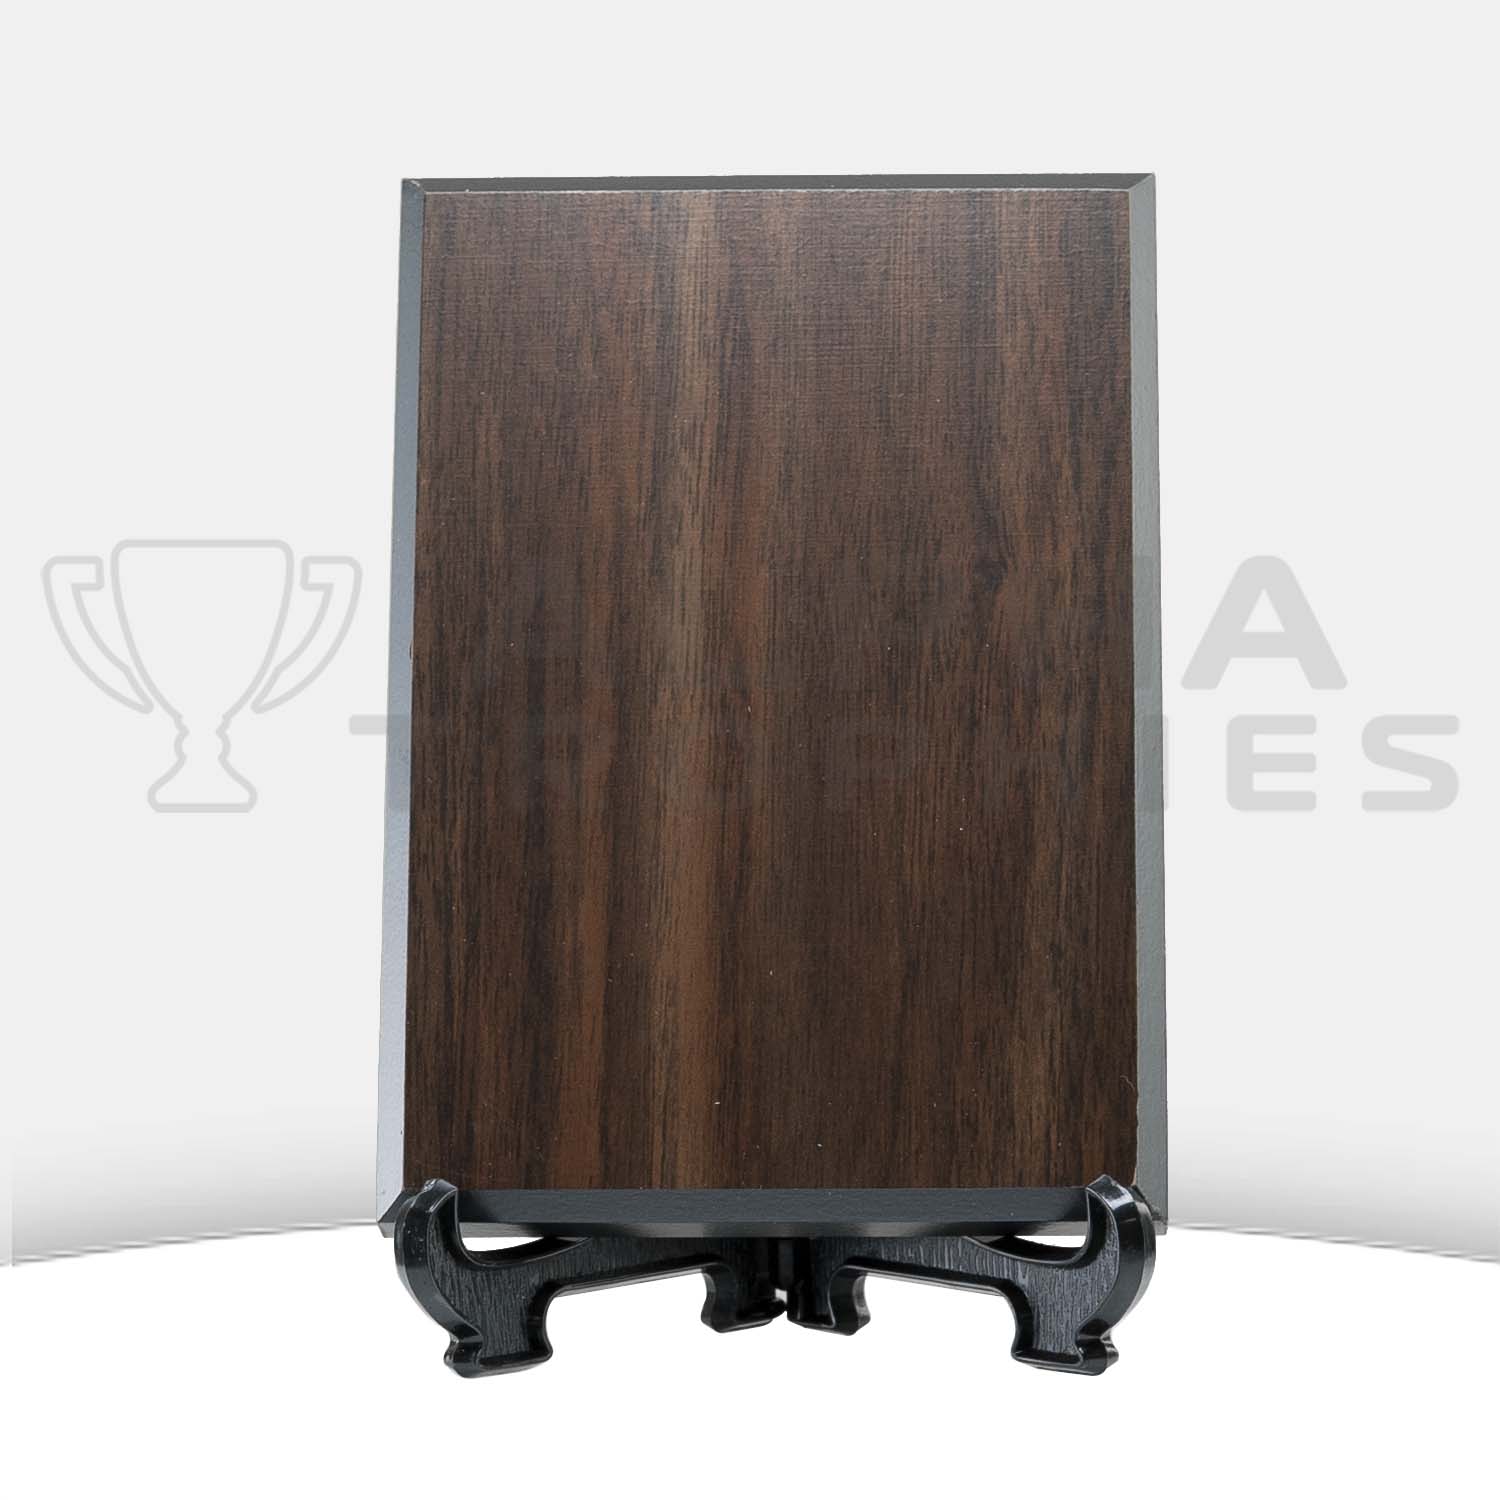 walnut-plaque-on-easel-stand-front